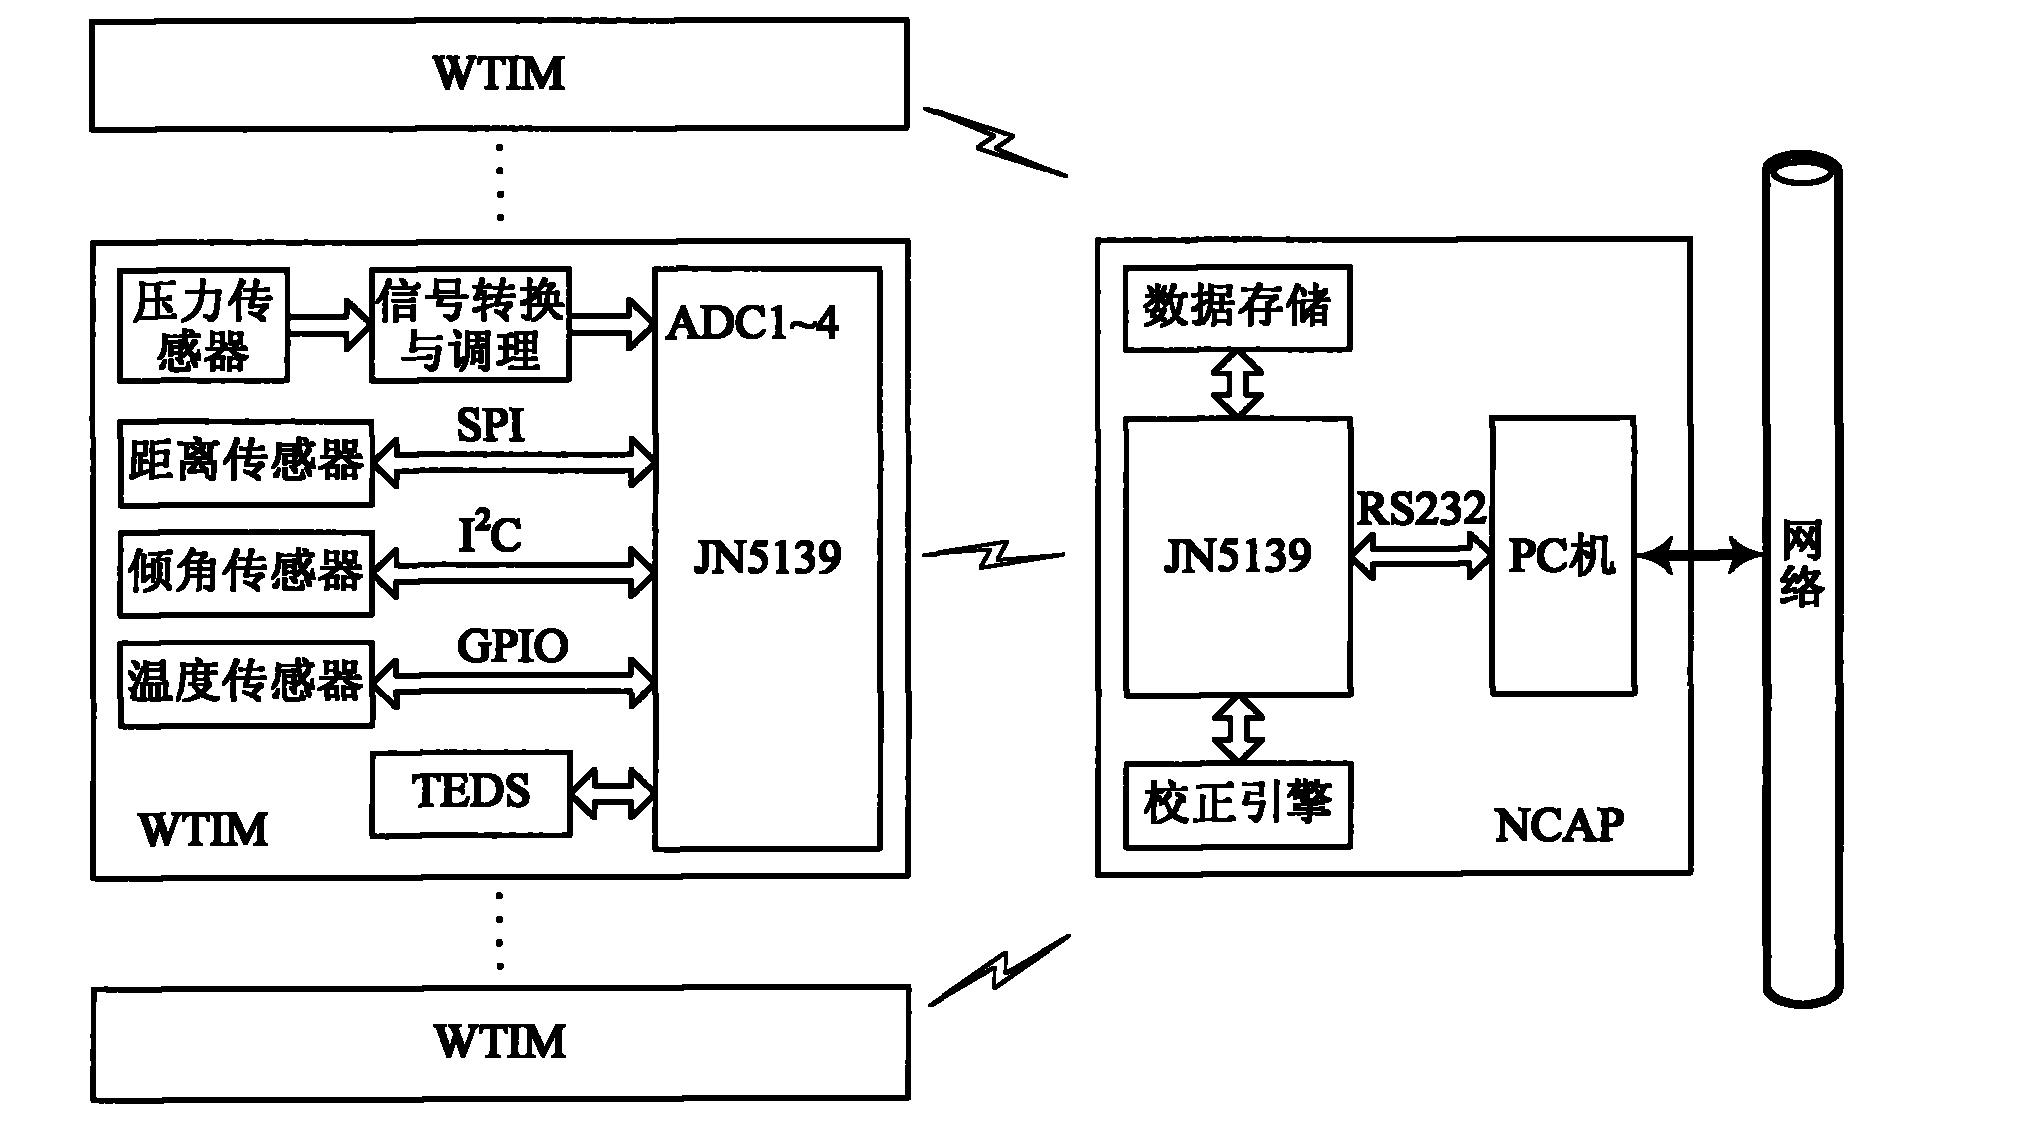 Wireless intelligent transducer and method for implementing plug and play of transducer